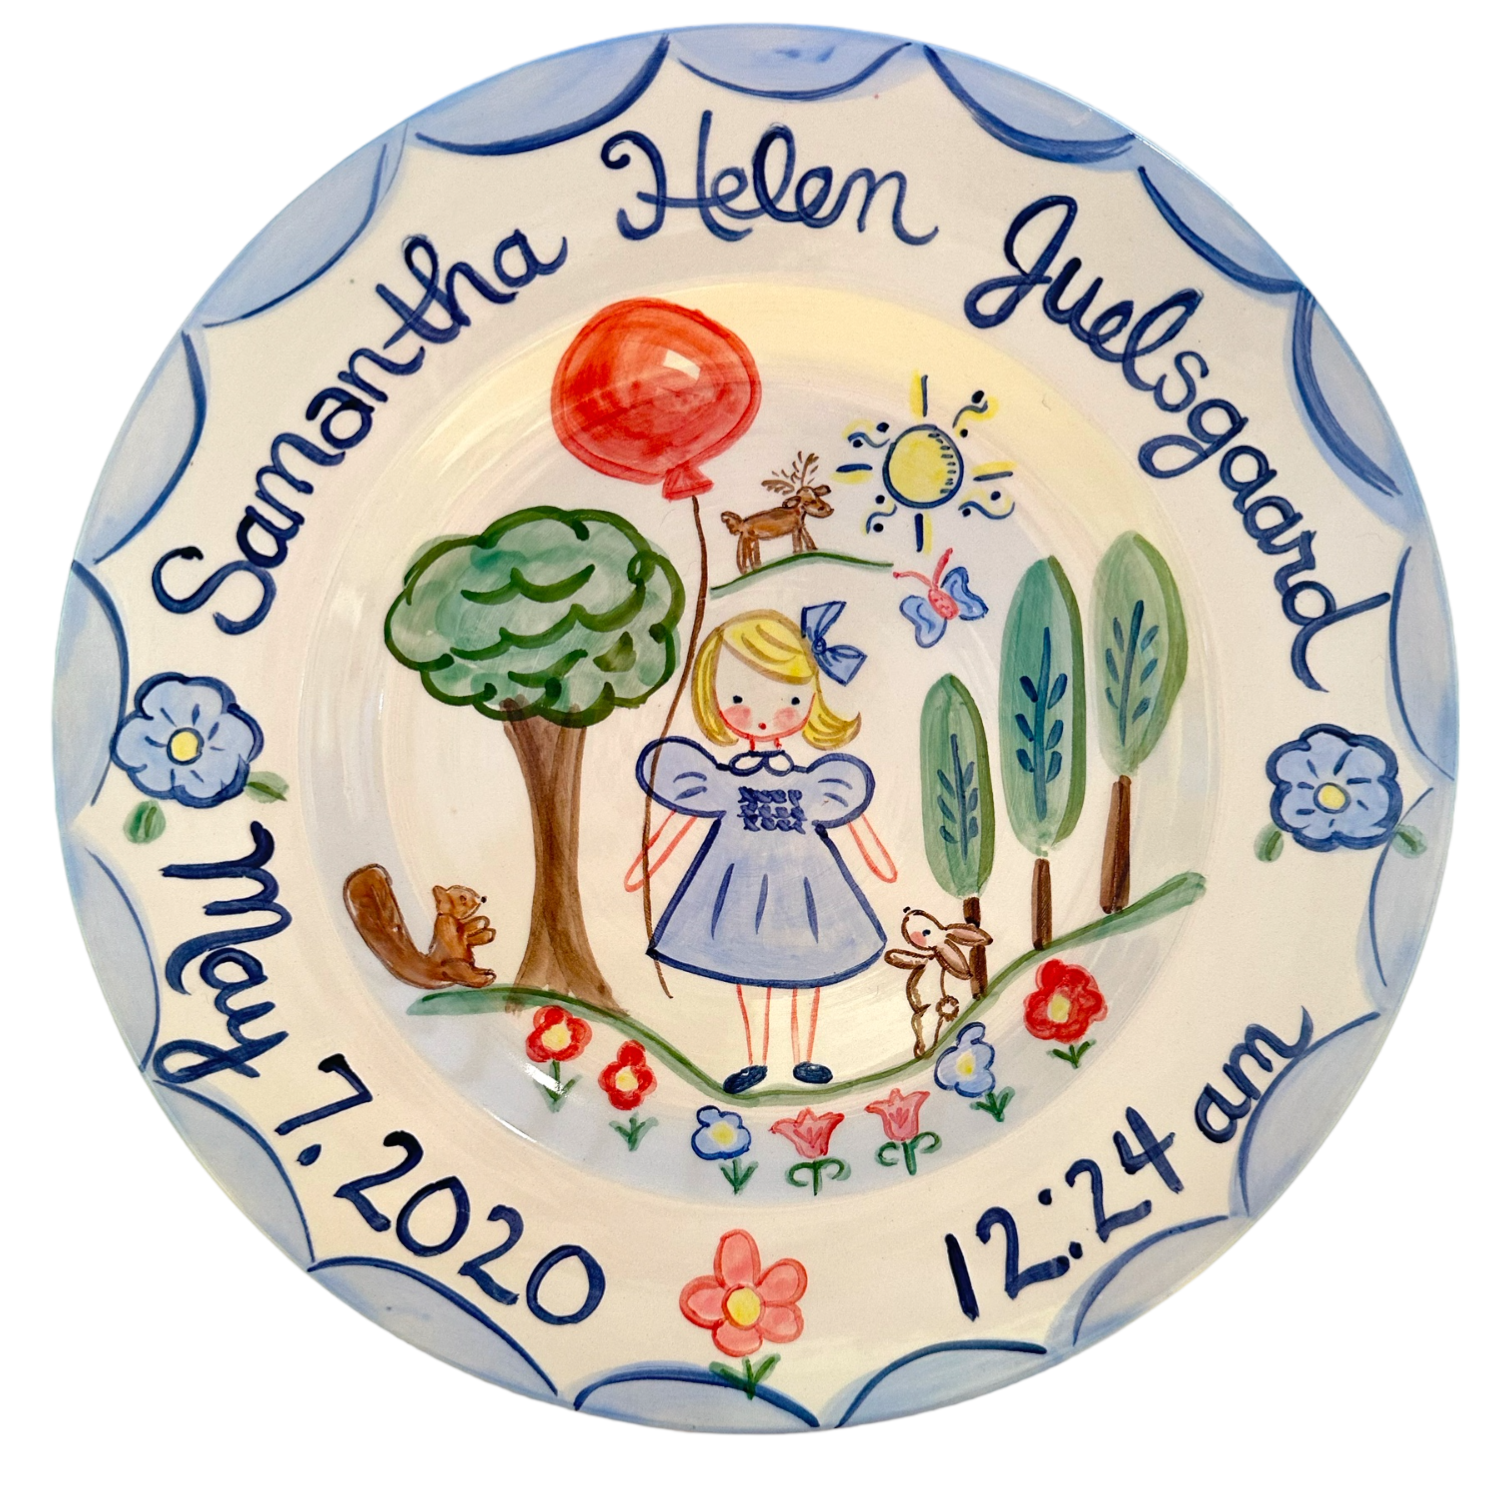 Birth Plate - Blue Dress (Full Color) - Premium  from Tricia Lowenfield Shop 